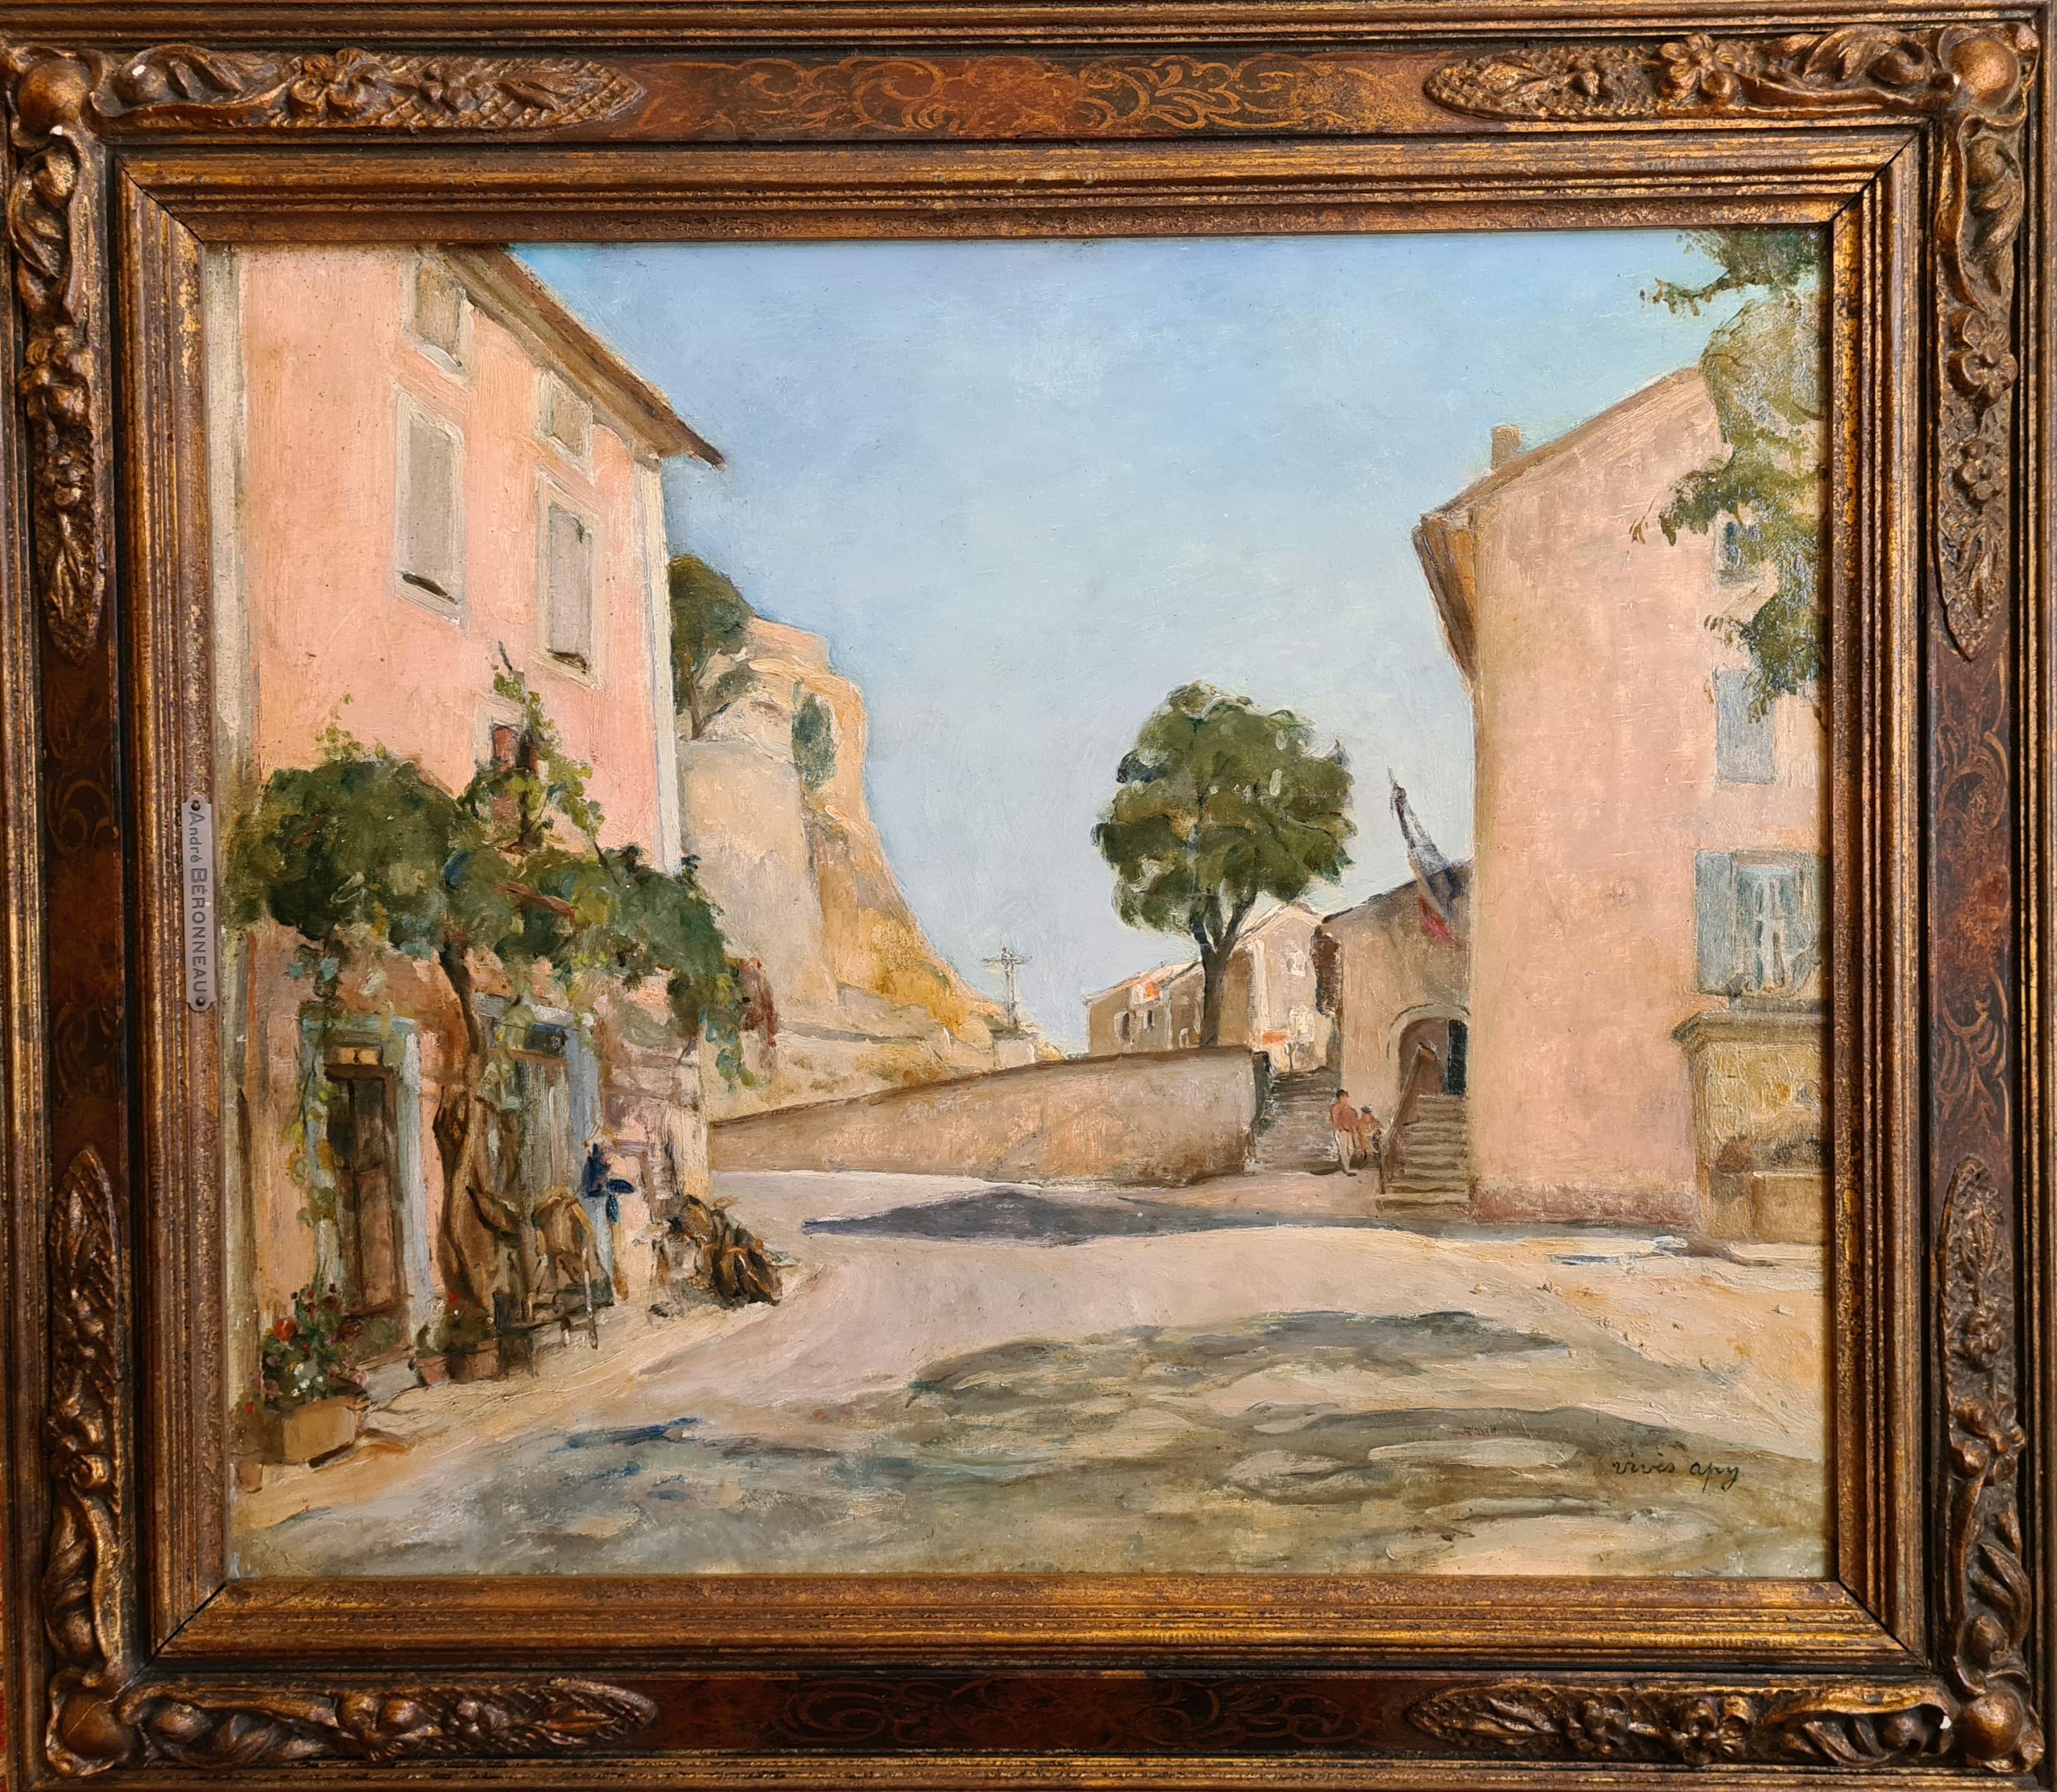  Charles Joseph Vives Apy Figurative Painting - Village Near Marseille, South of France.